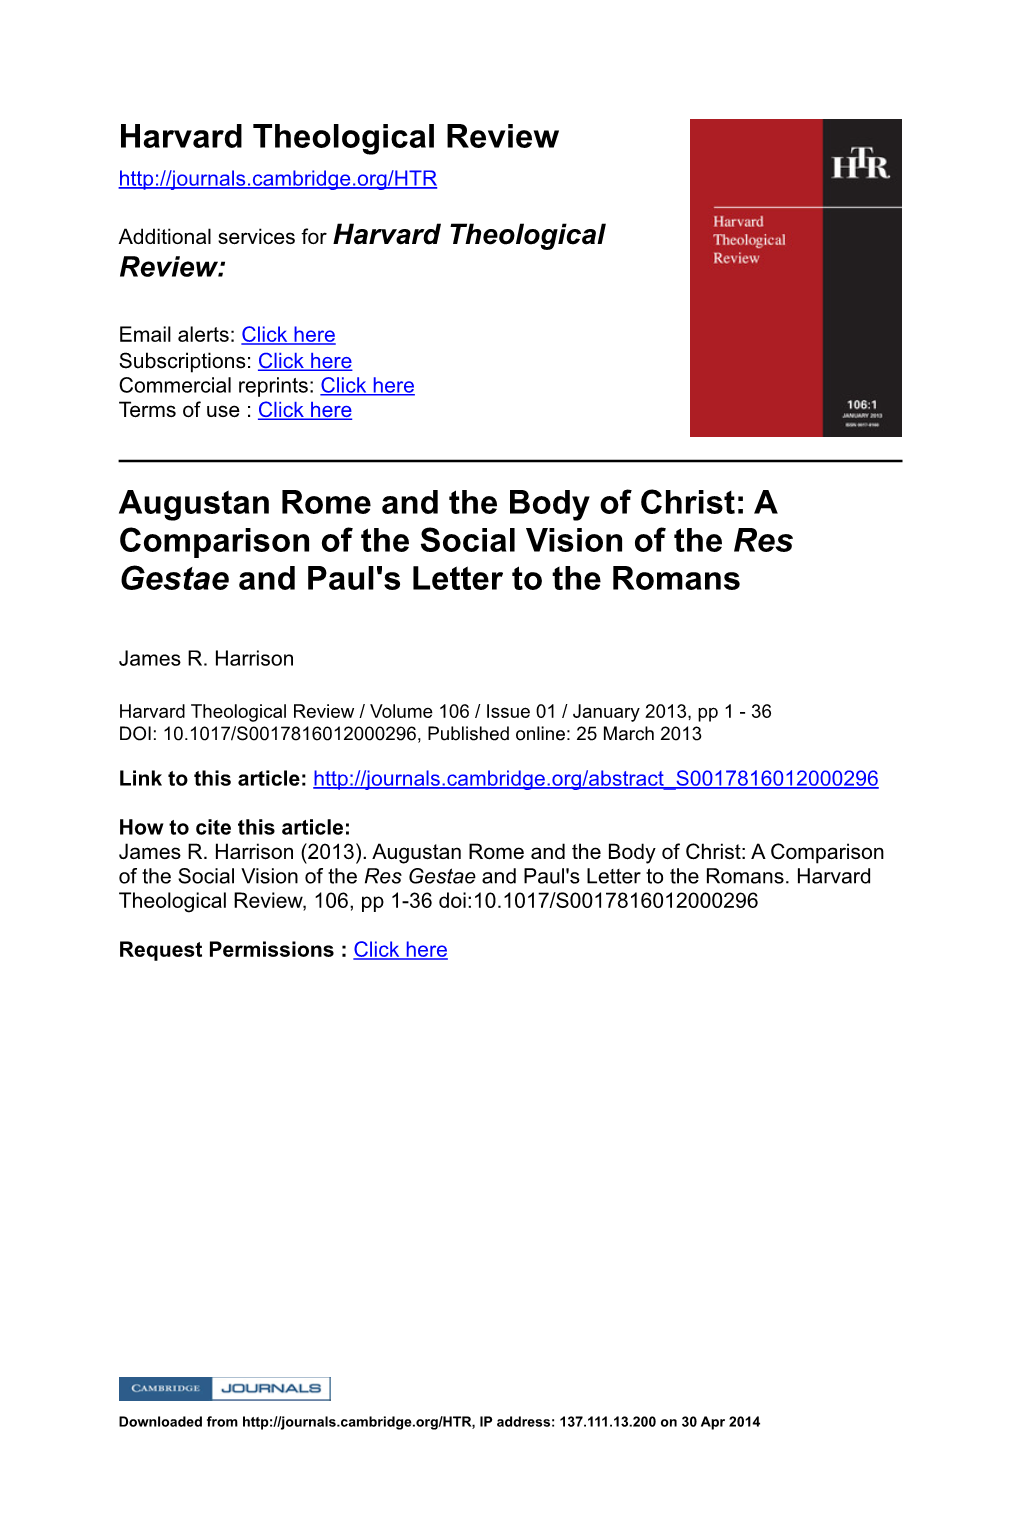 Res Gestae and Paul's Letter to the Romans